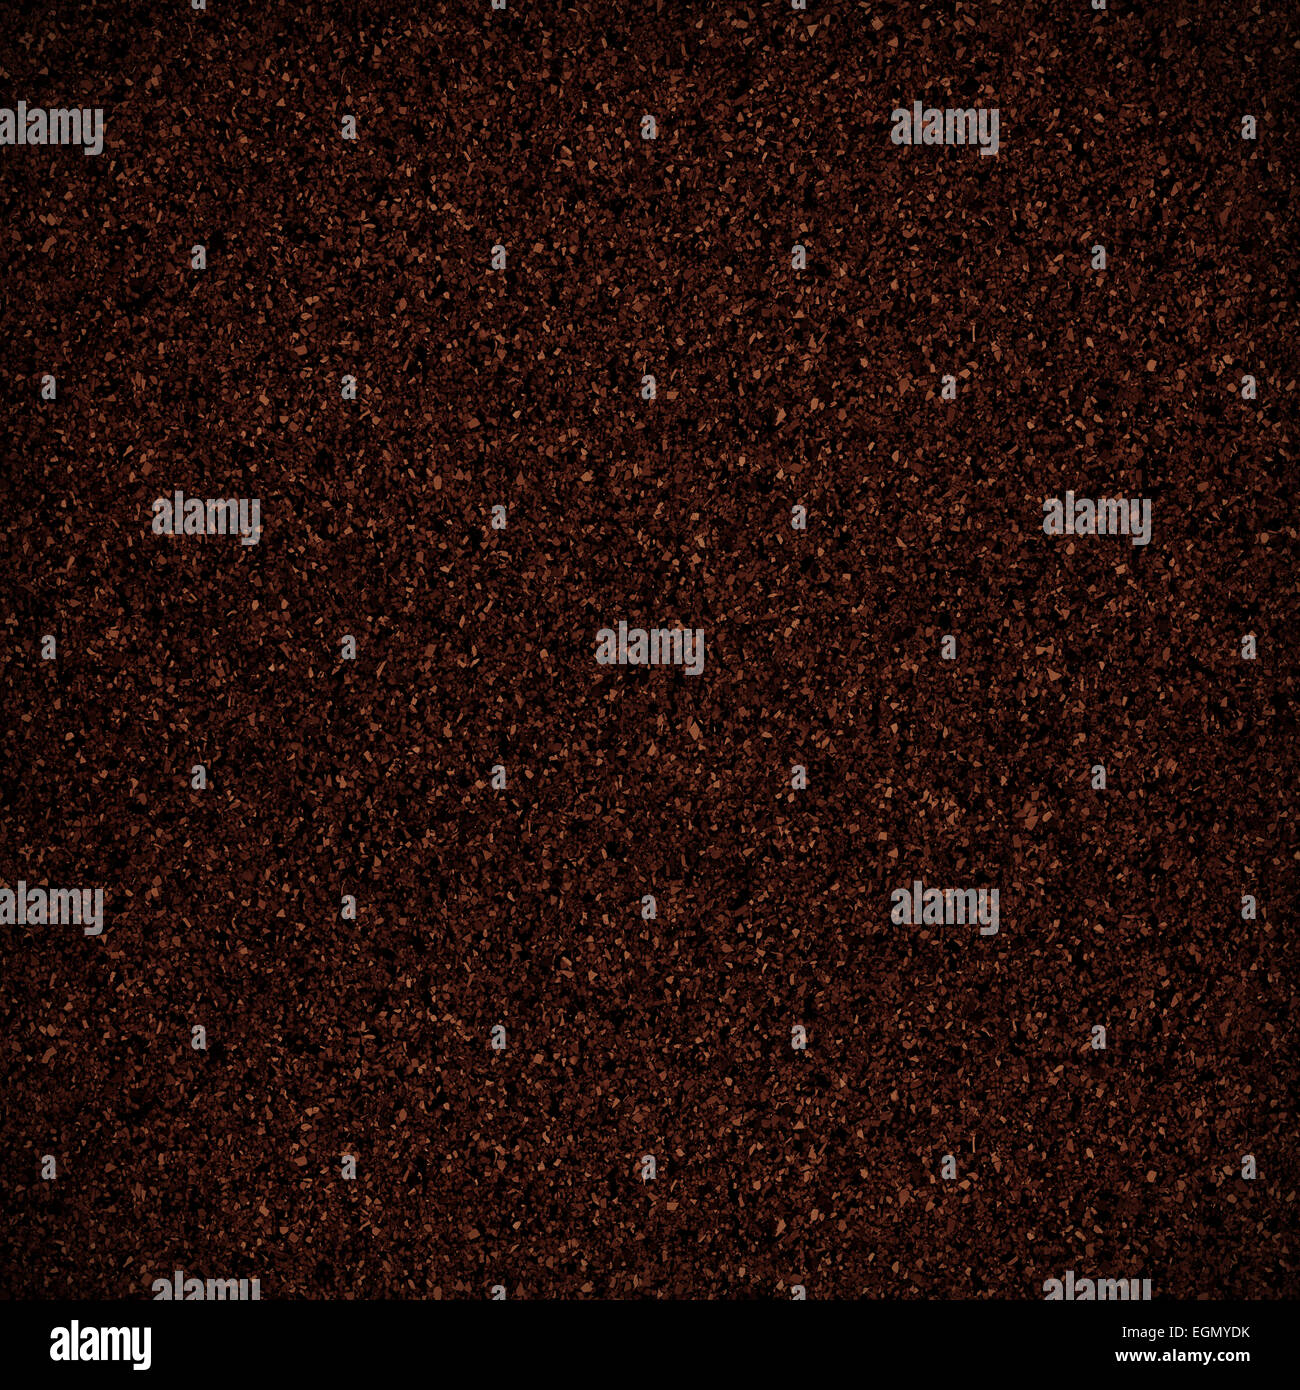 grain pattern abstract brown background or bronze cork texture Stock Photo